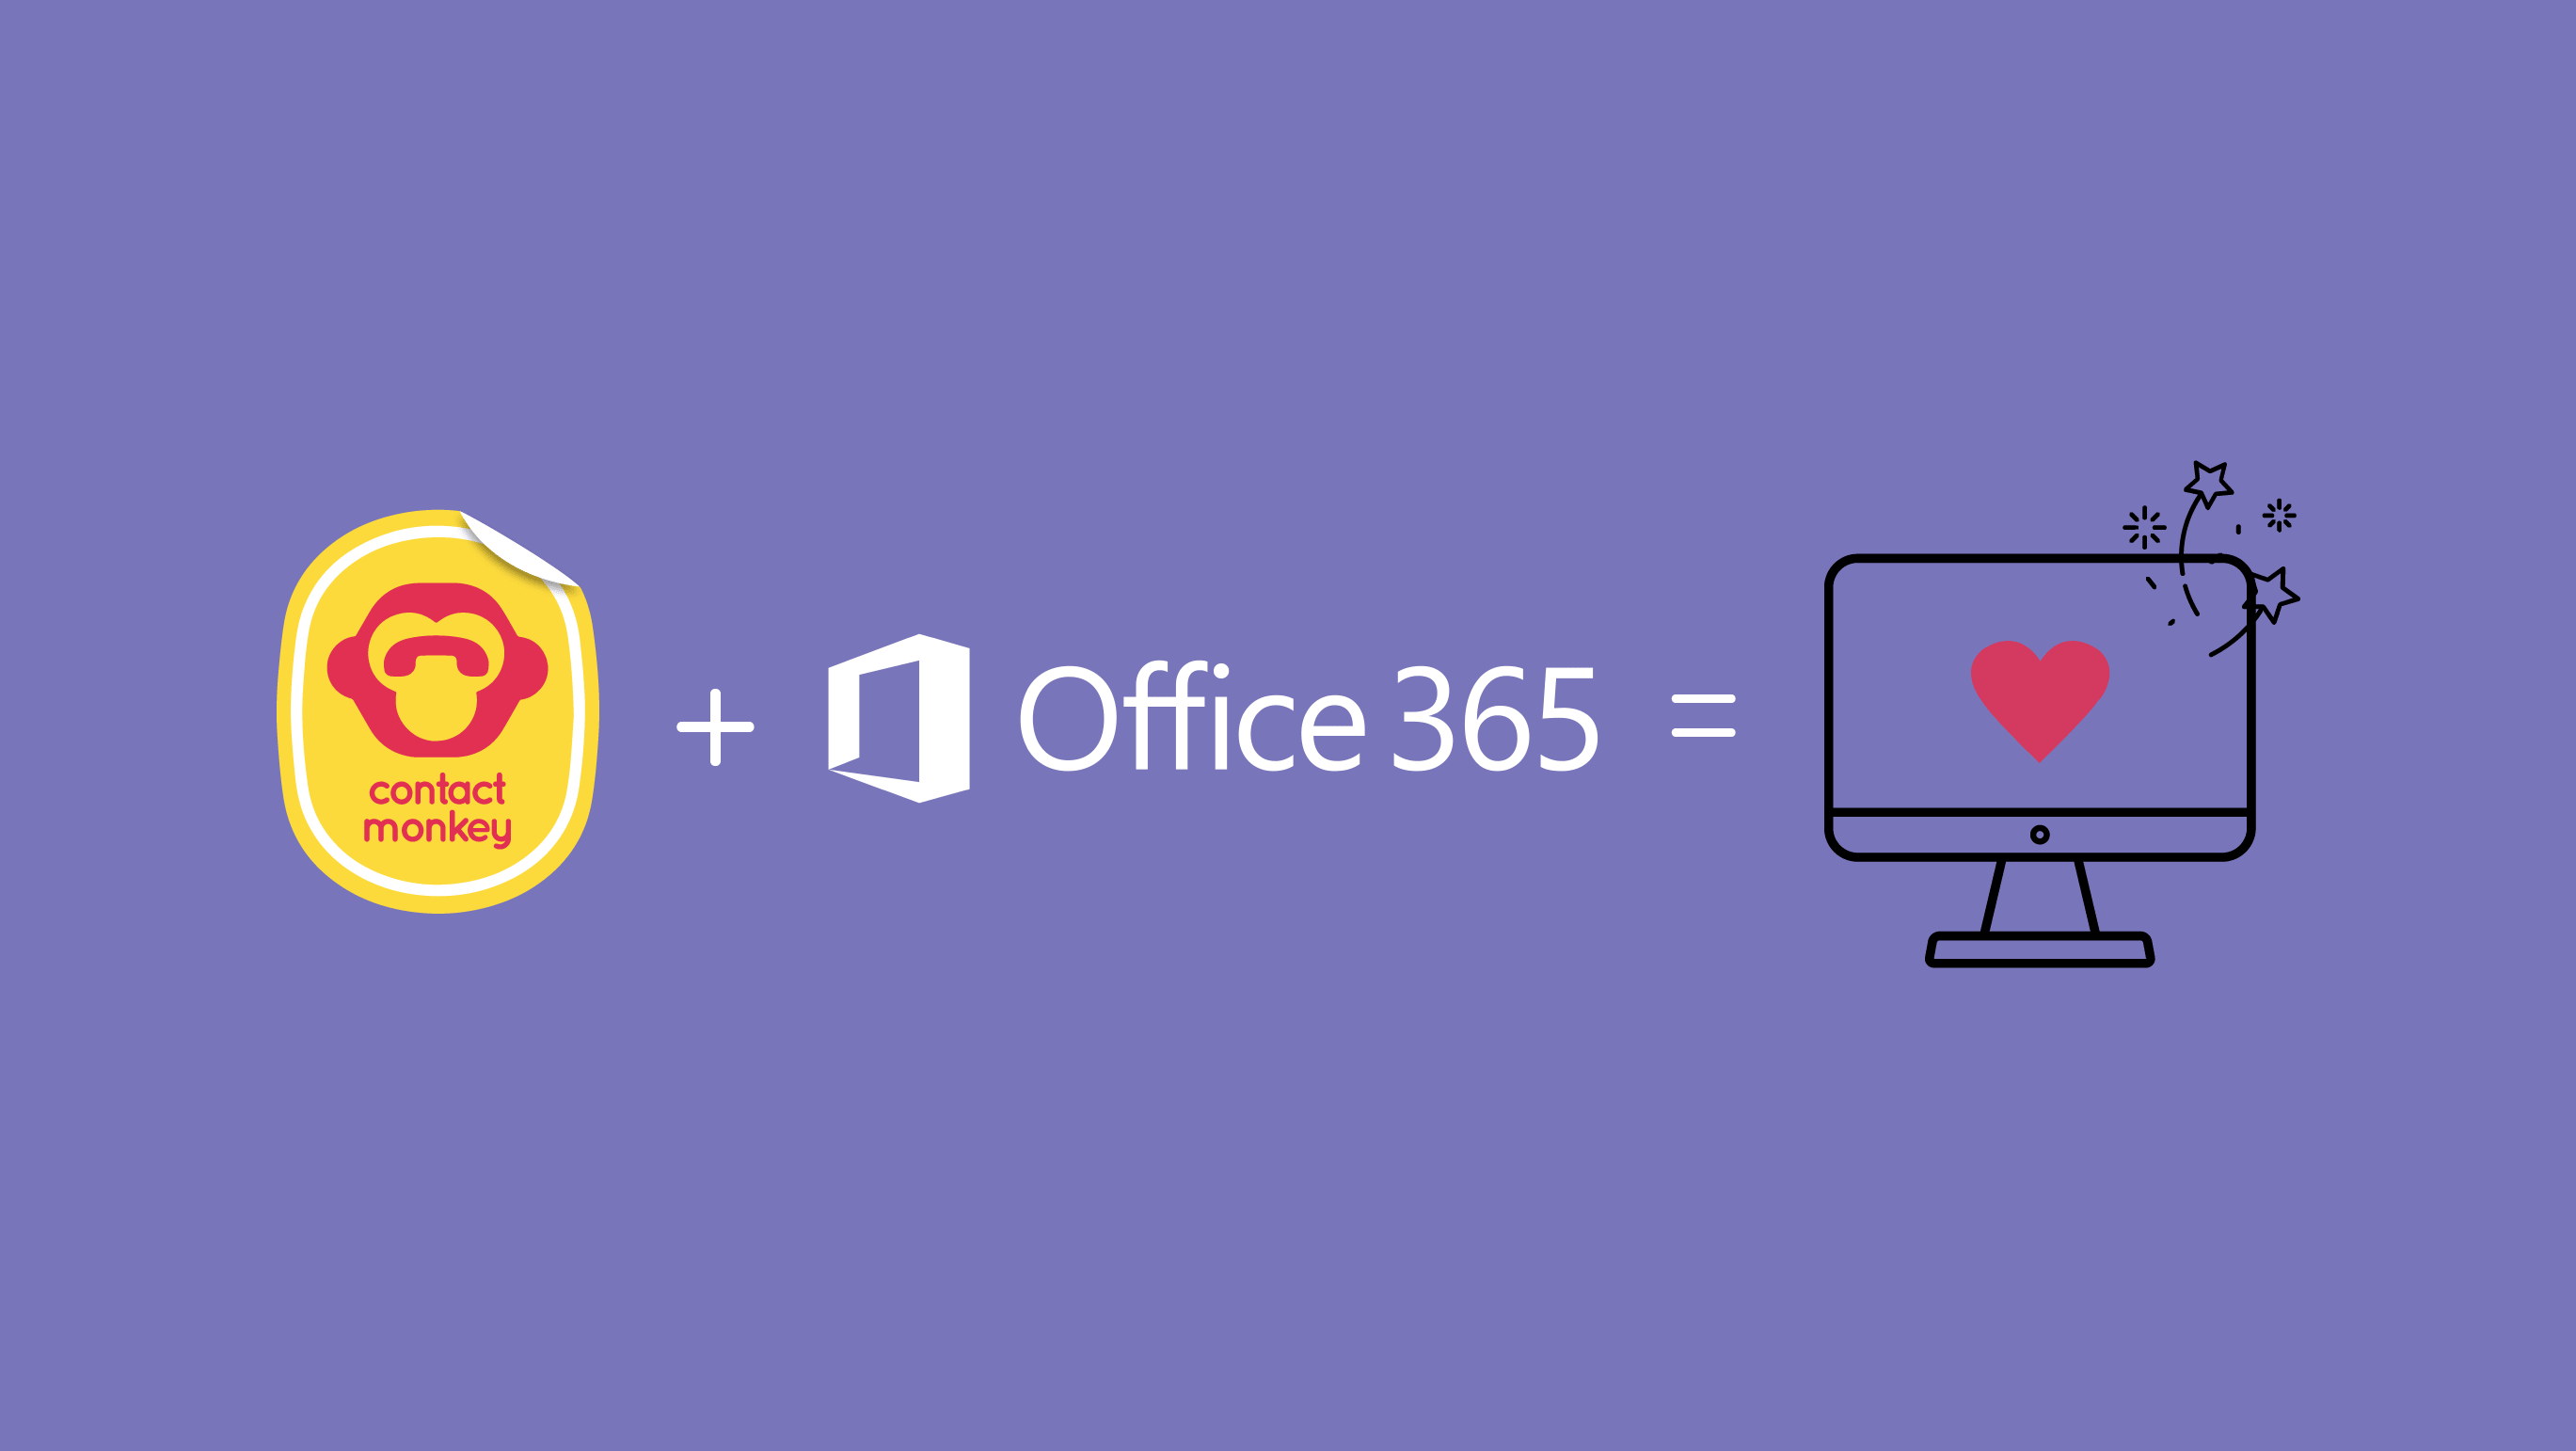 Outlook Office 365 Logo - Outlook Mail Merge for Office 365 - Send HTML emails from Outlook!